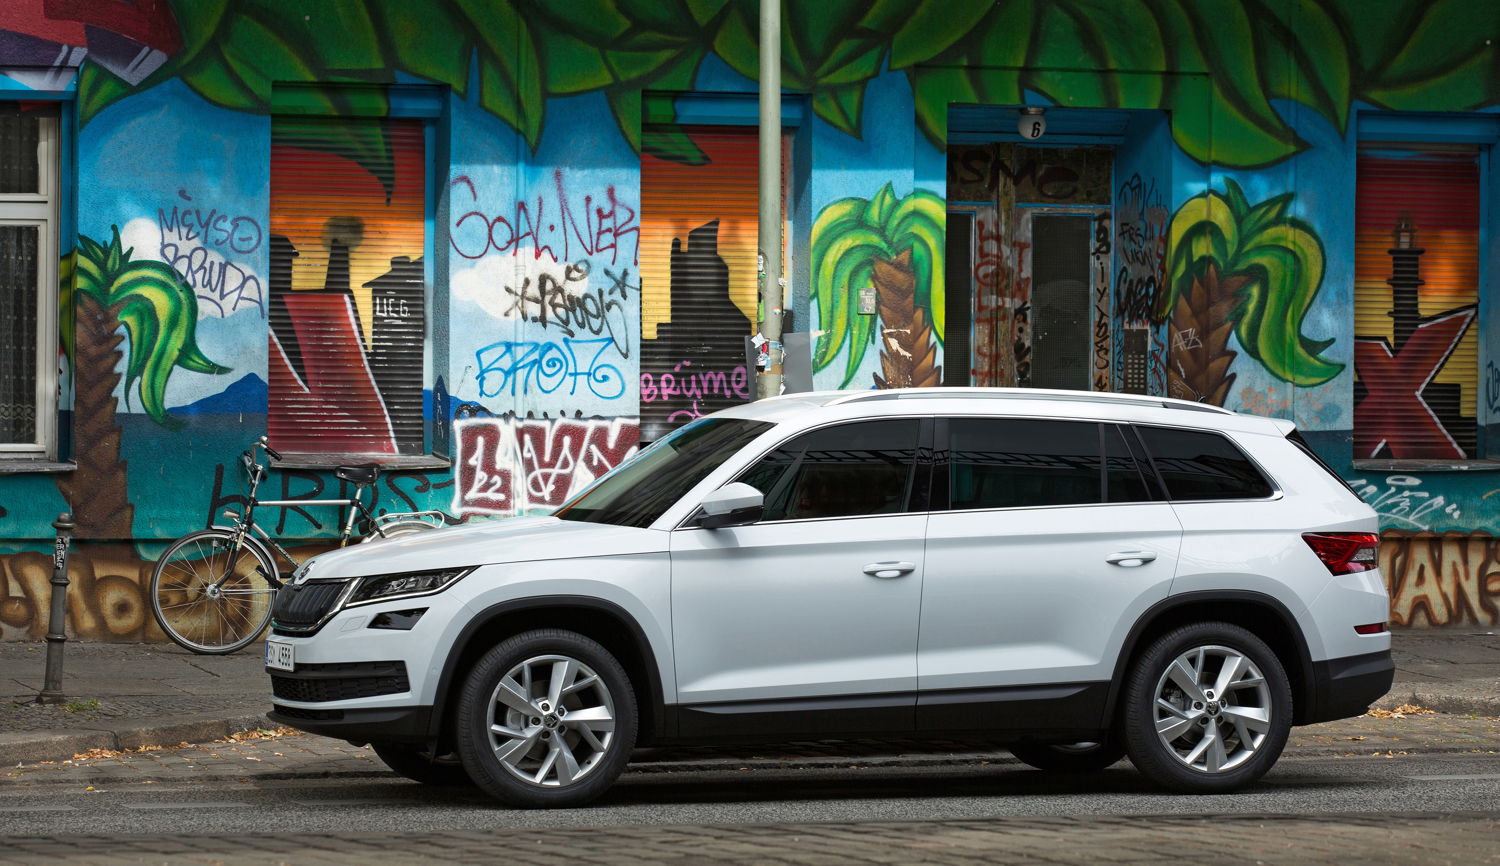 With a total of 27,100 deliveries since February, the ŠKODA KODIAQ large SUV (image) has had a successful start in the markets worldwide.